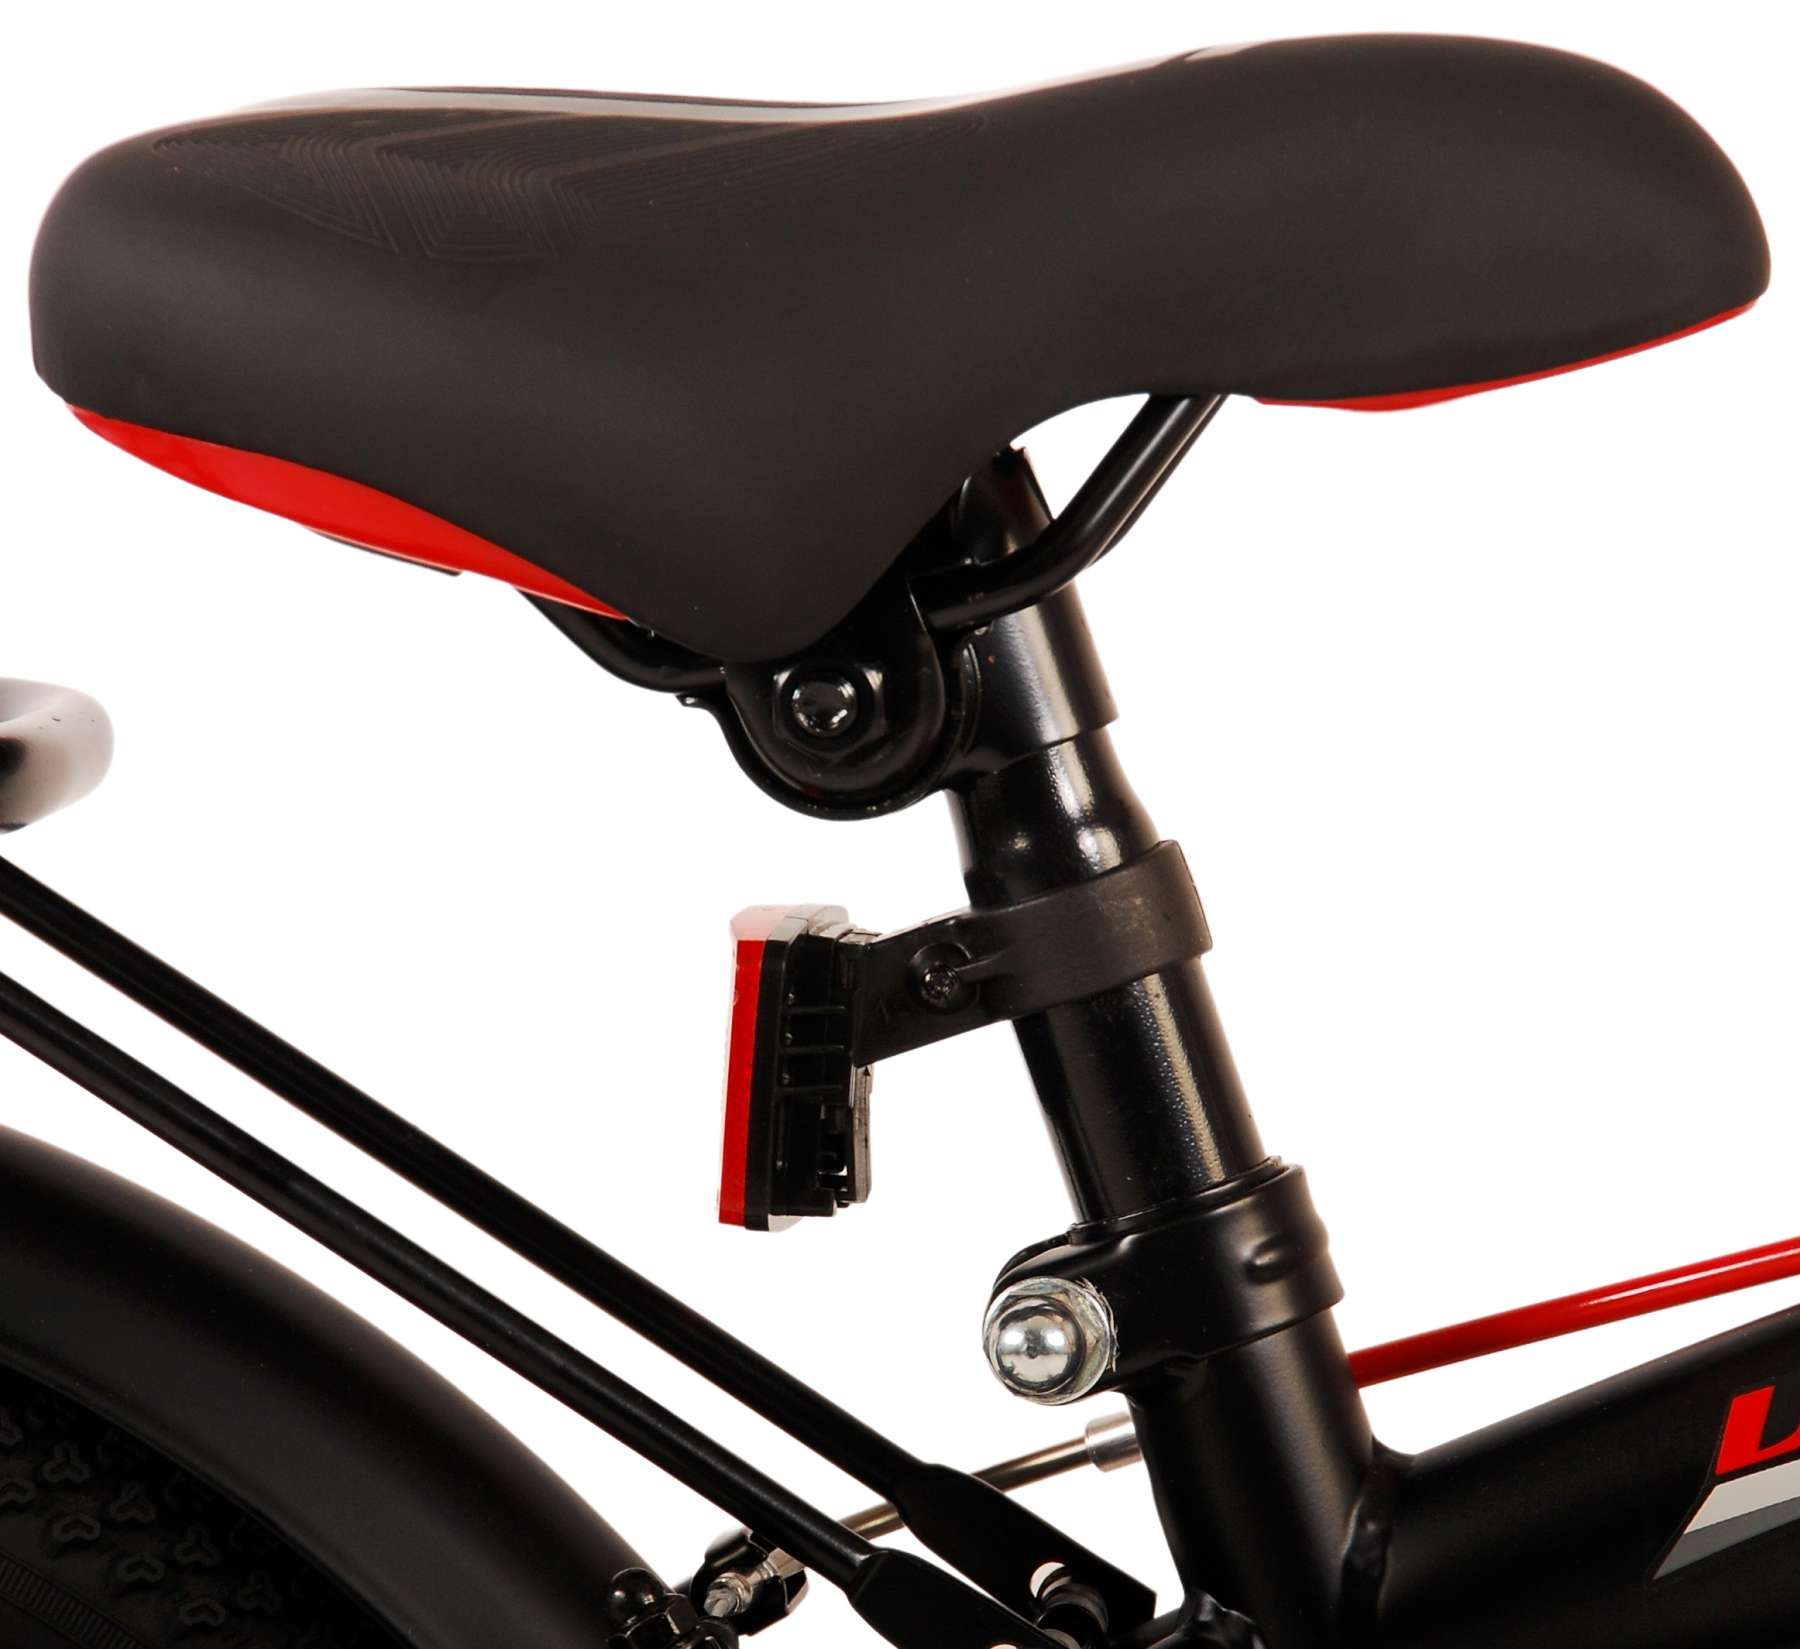 Thombike_16_inch_Rood_-_7-W1800